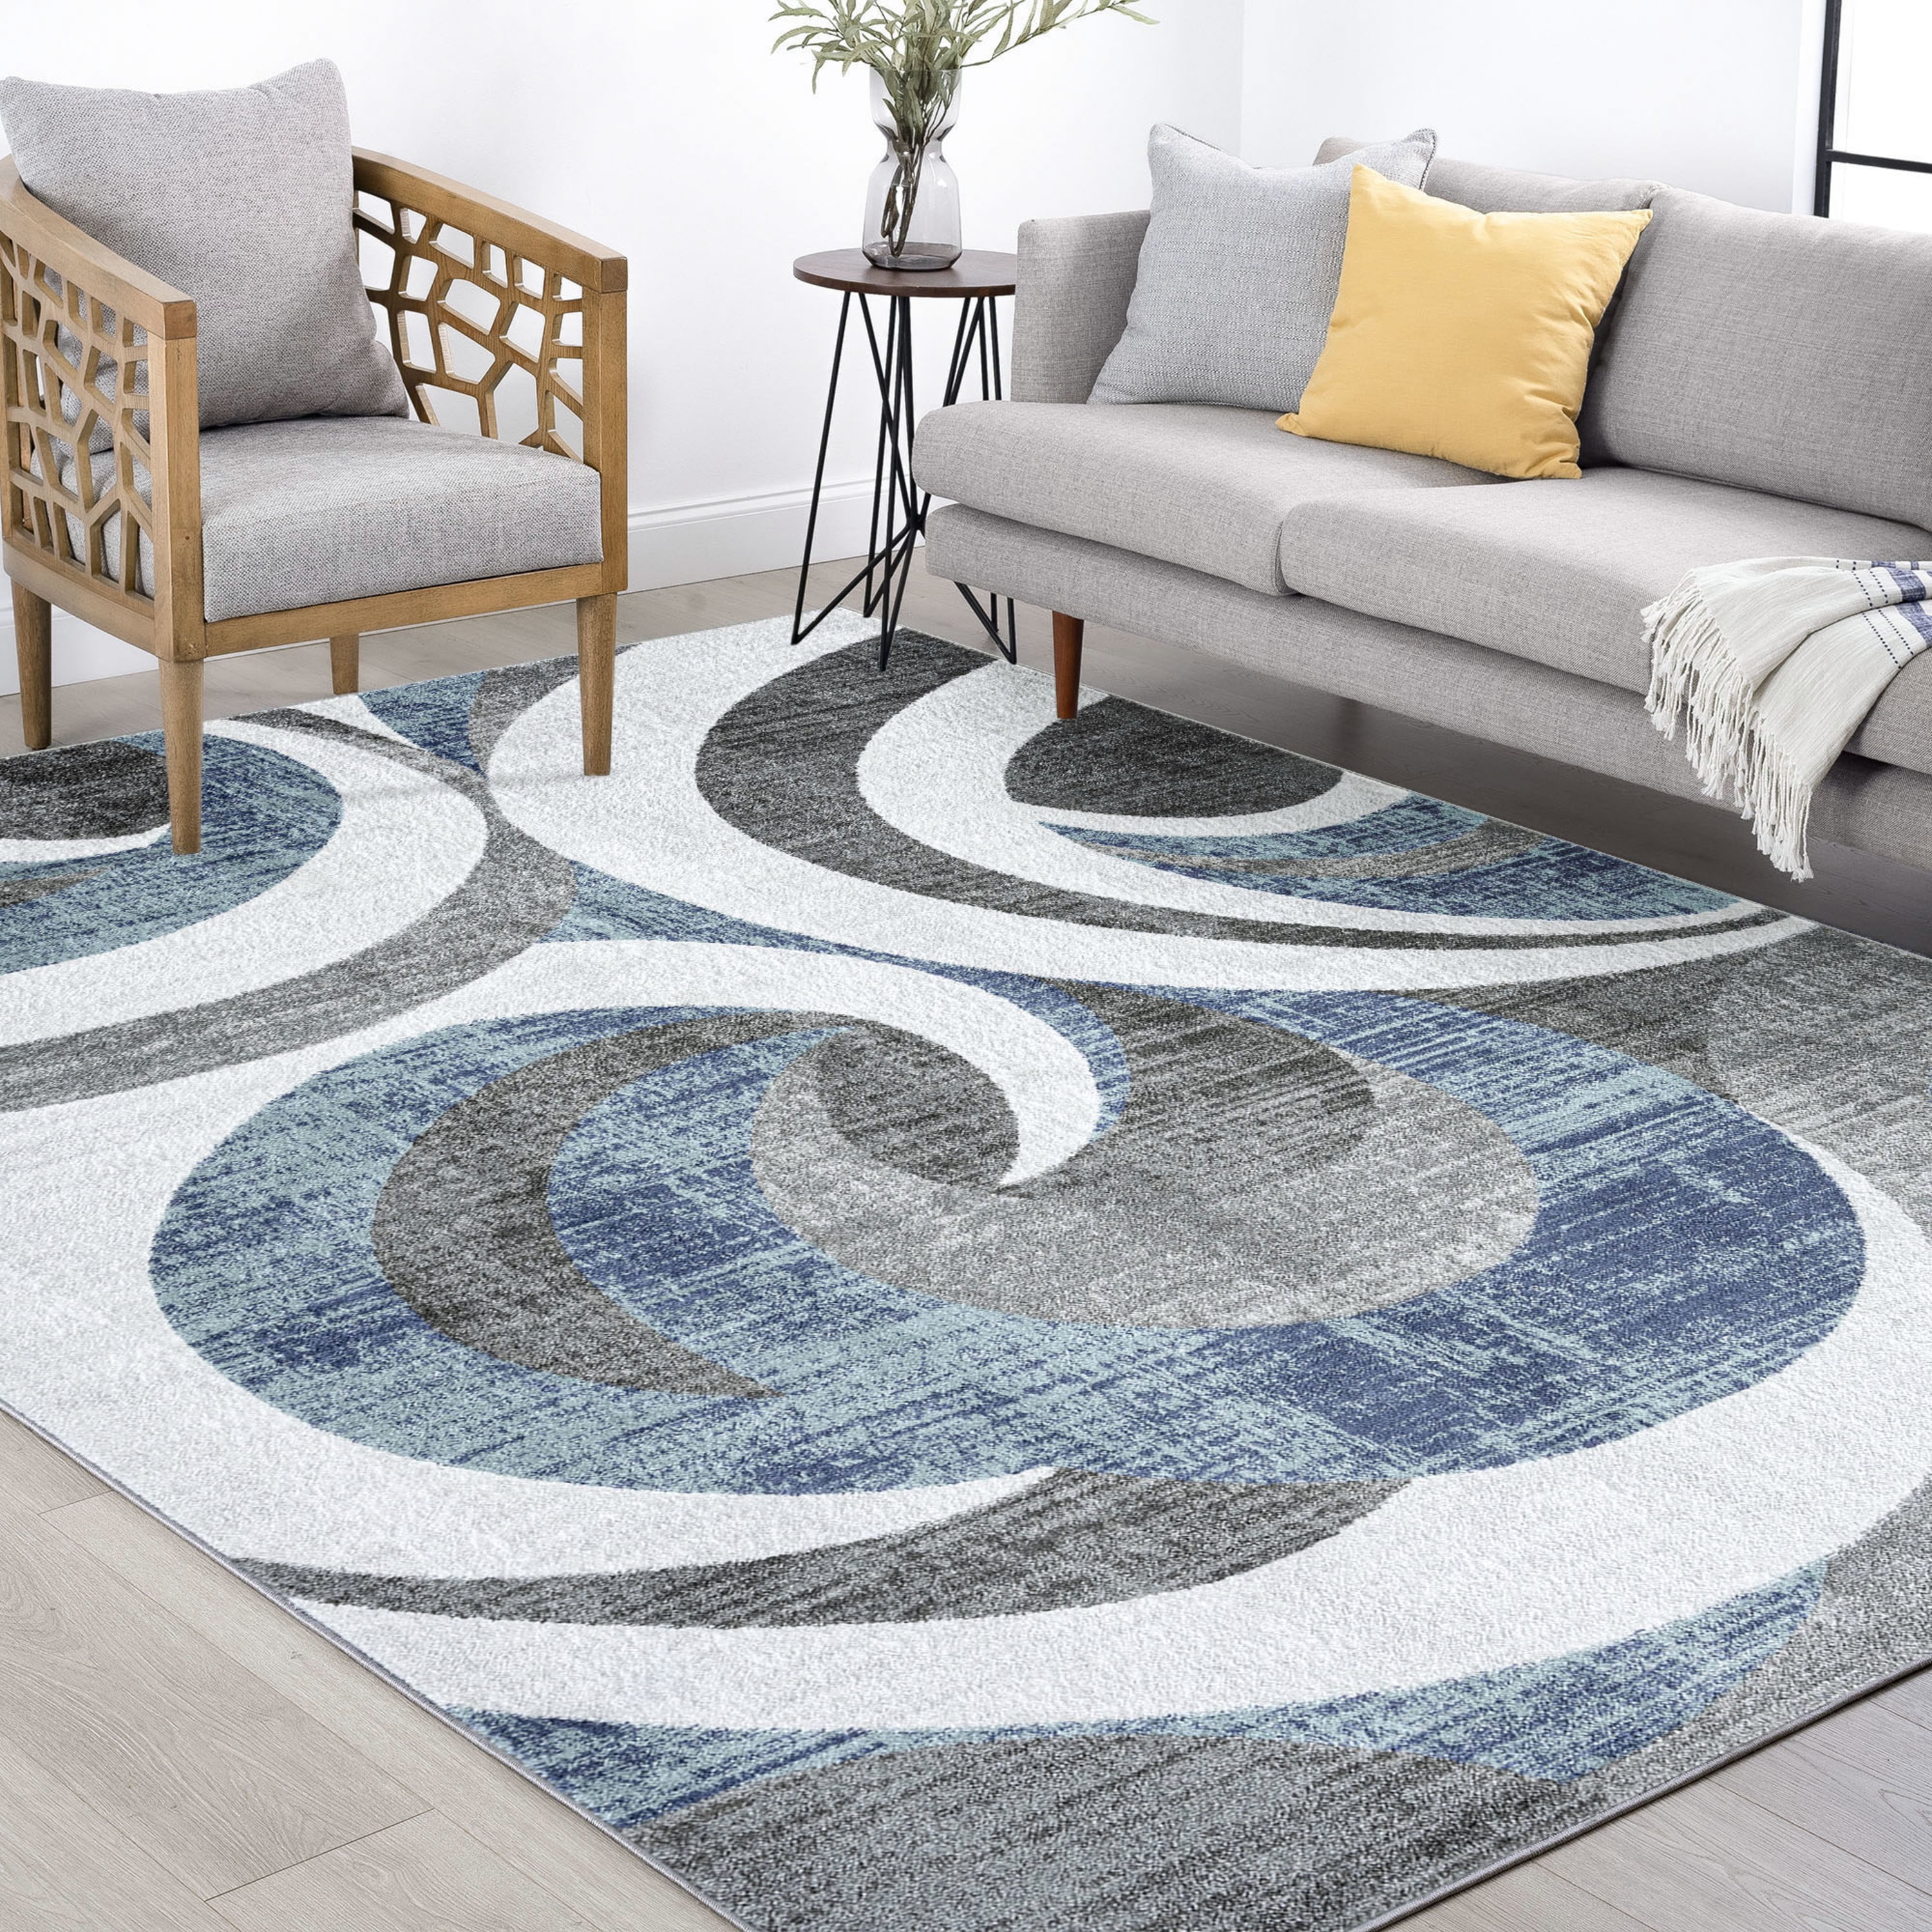 Contemporary Modern Artistic Abstract Area Rug 5'3" x 7'6" 5x8 